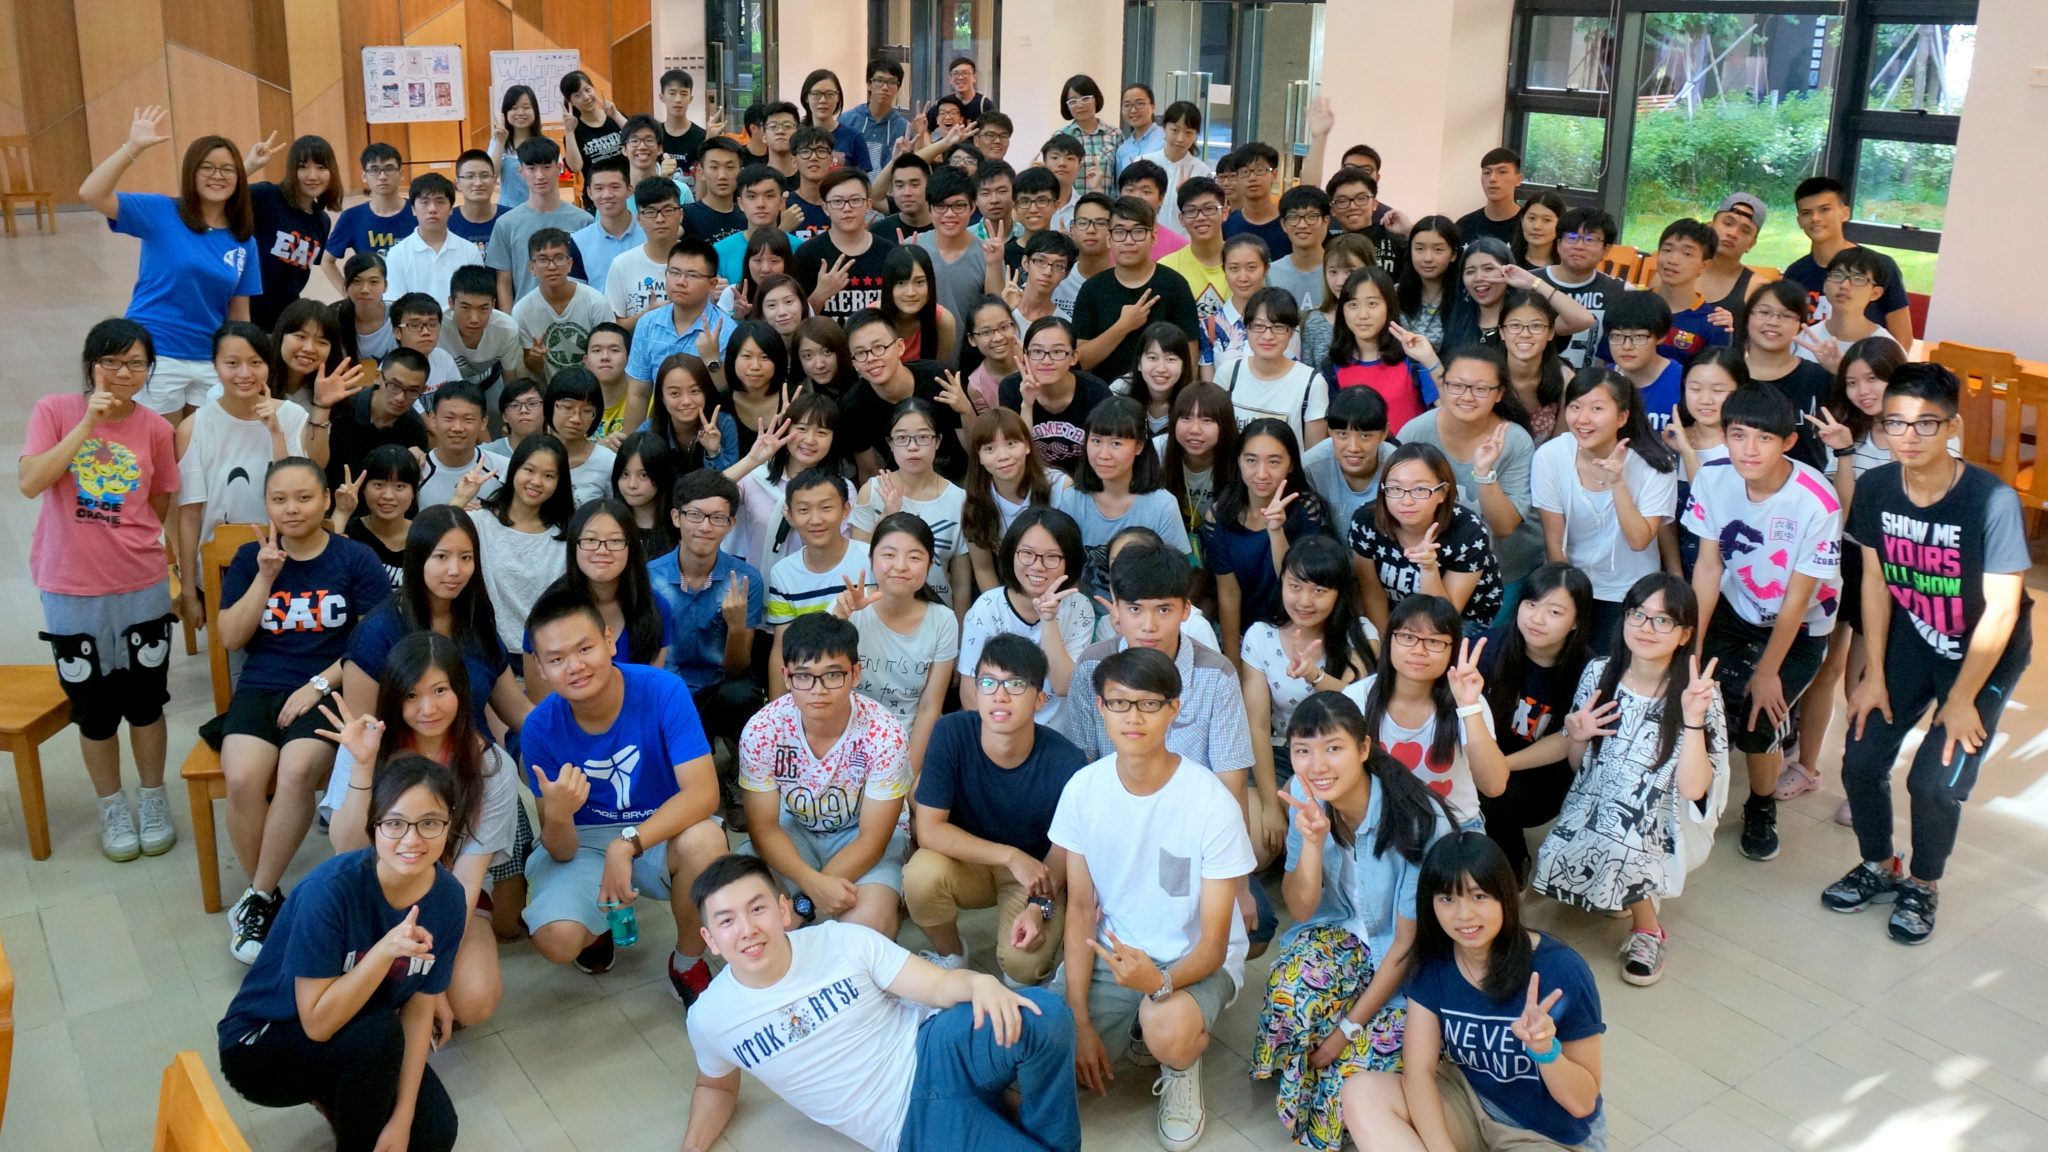 Group photo after a series of exciting ice-breaking games. 完成一系列令人興奮的破冰遊戲後合影留念。